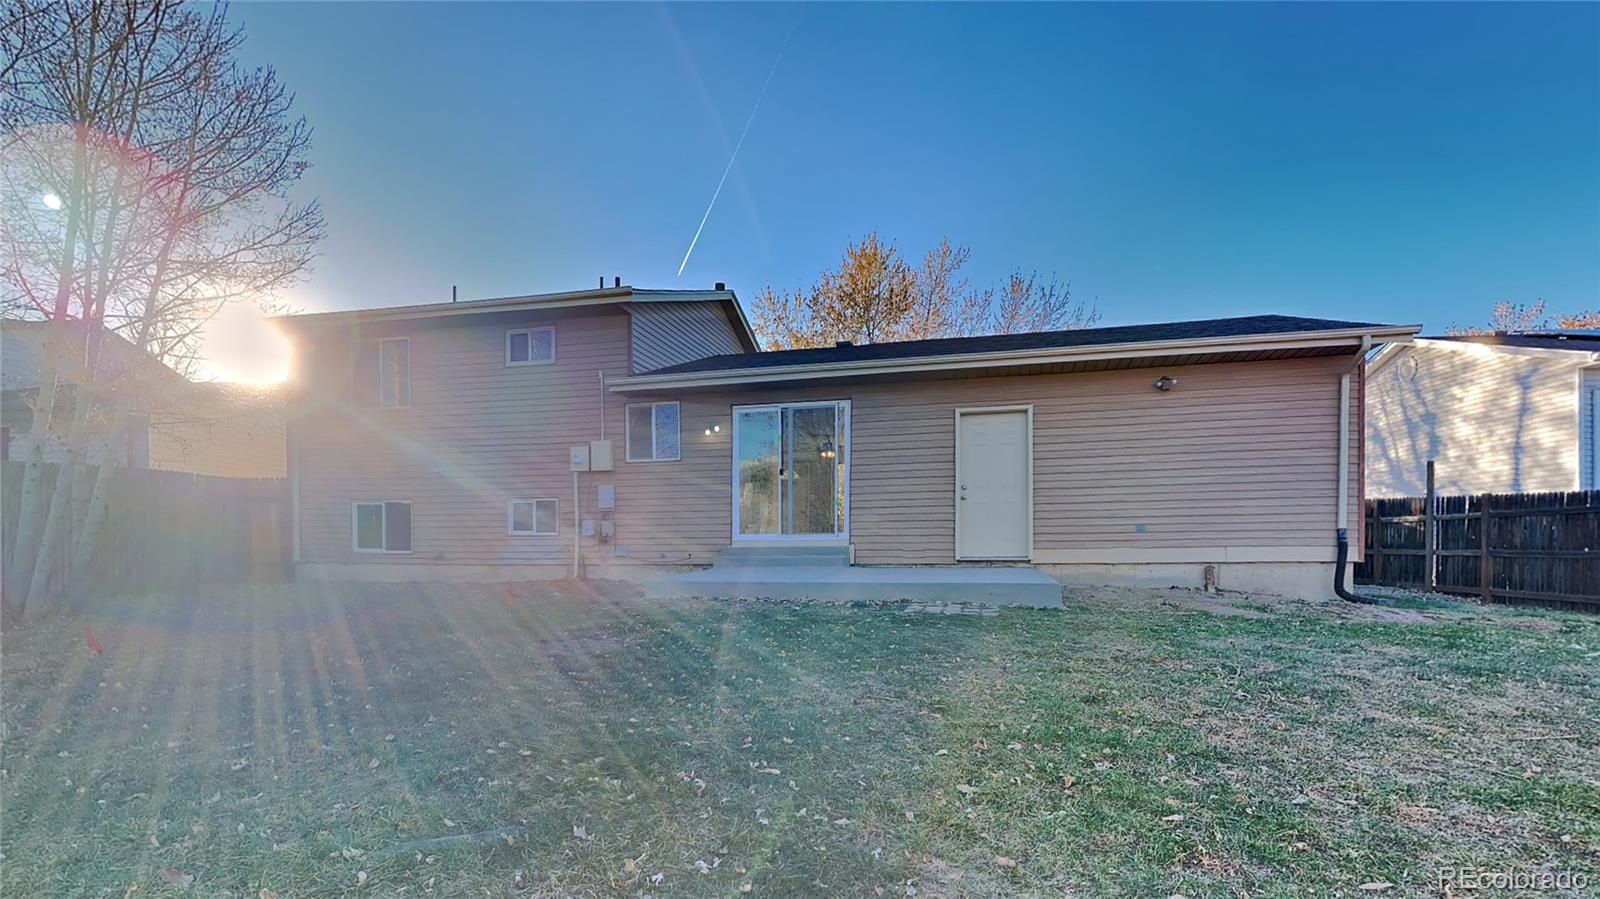 Report Image for 12264  Garfield Place,Thornton, Colorado